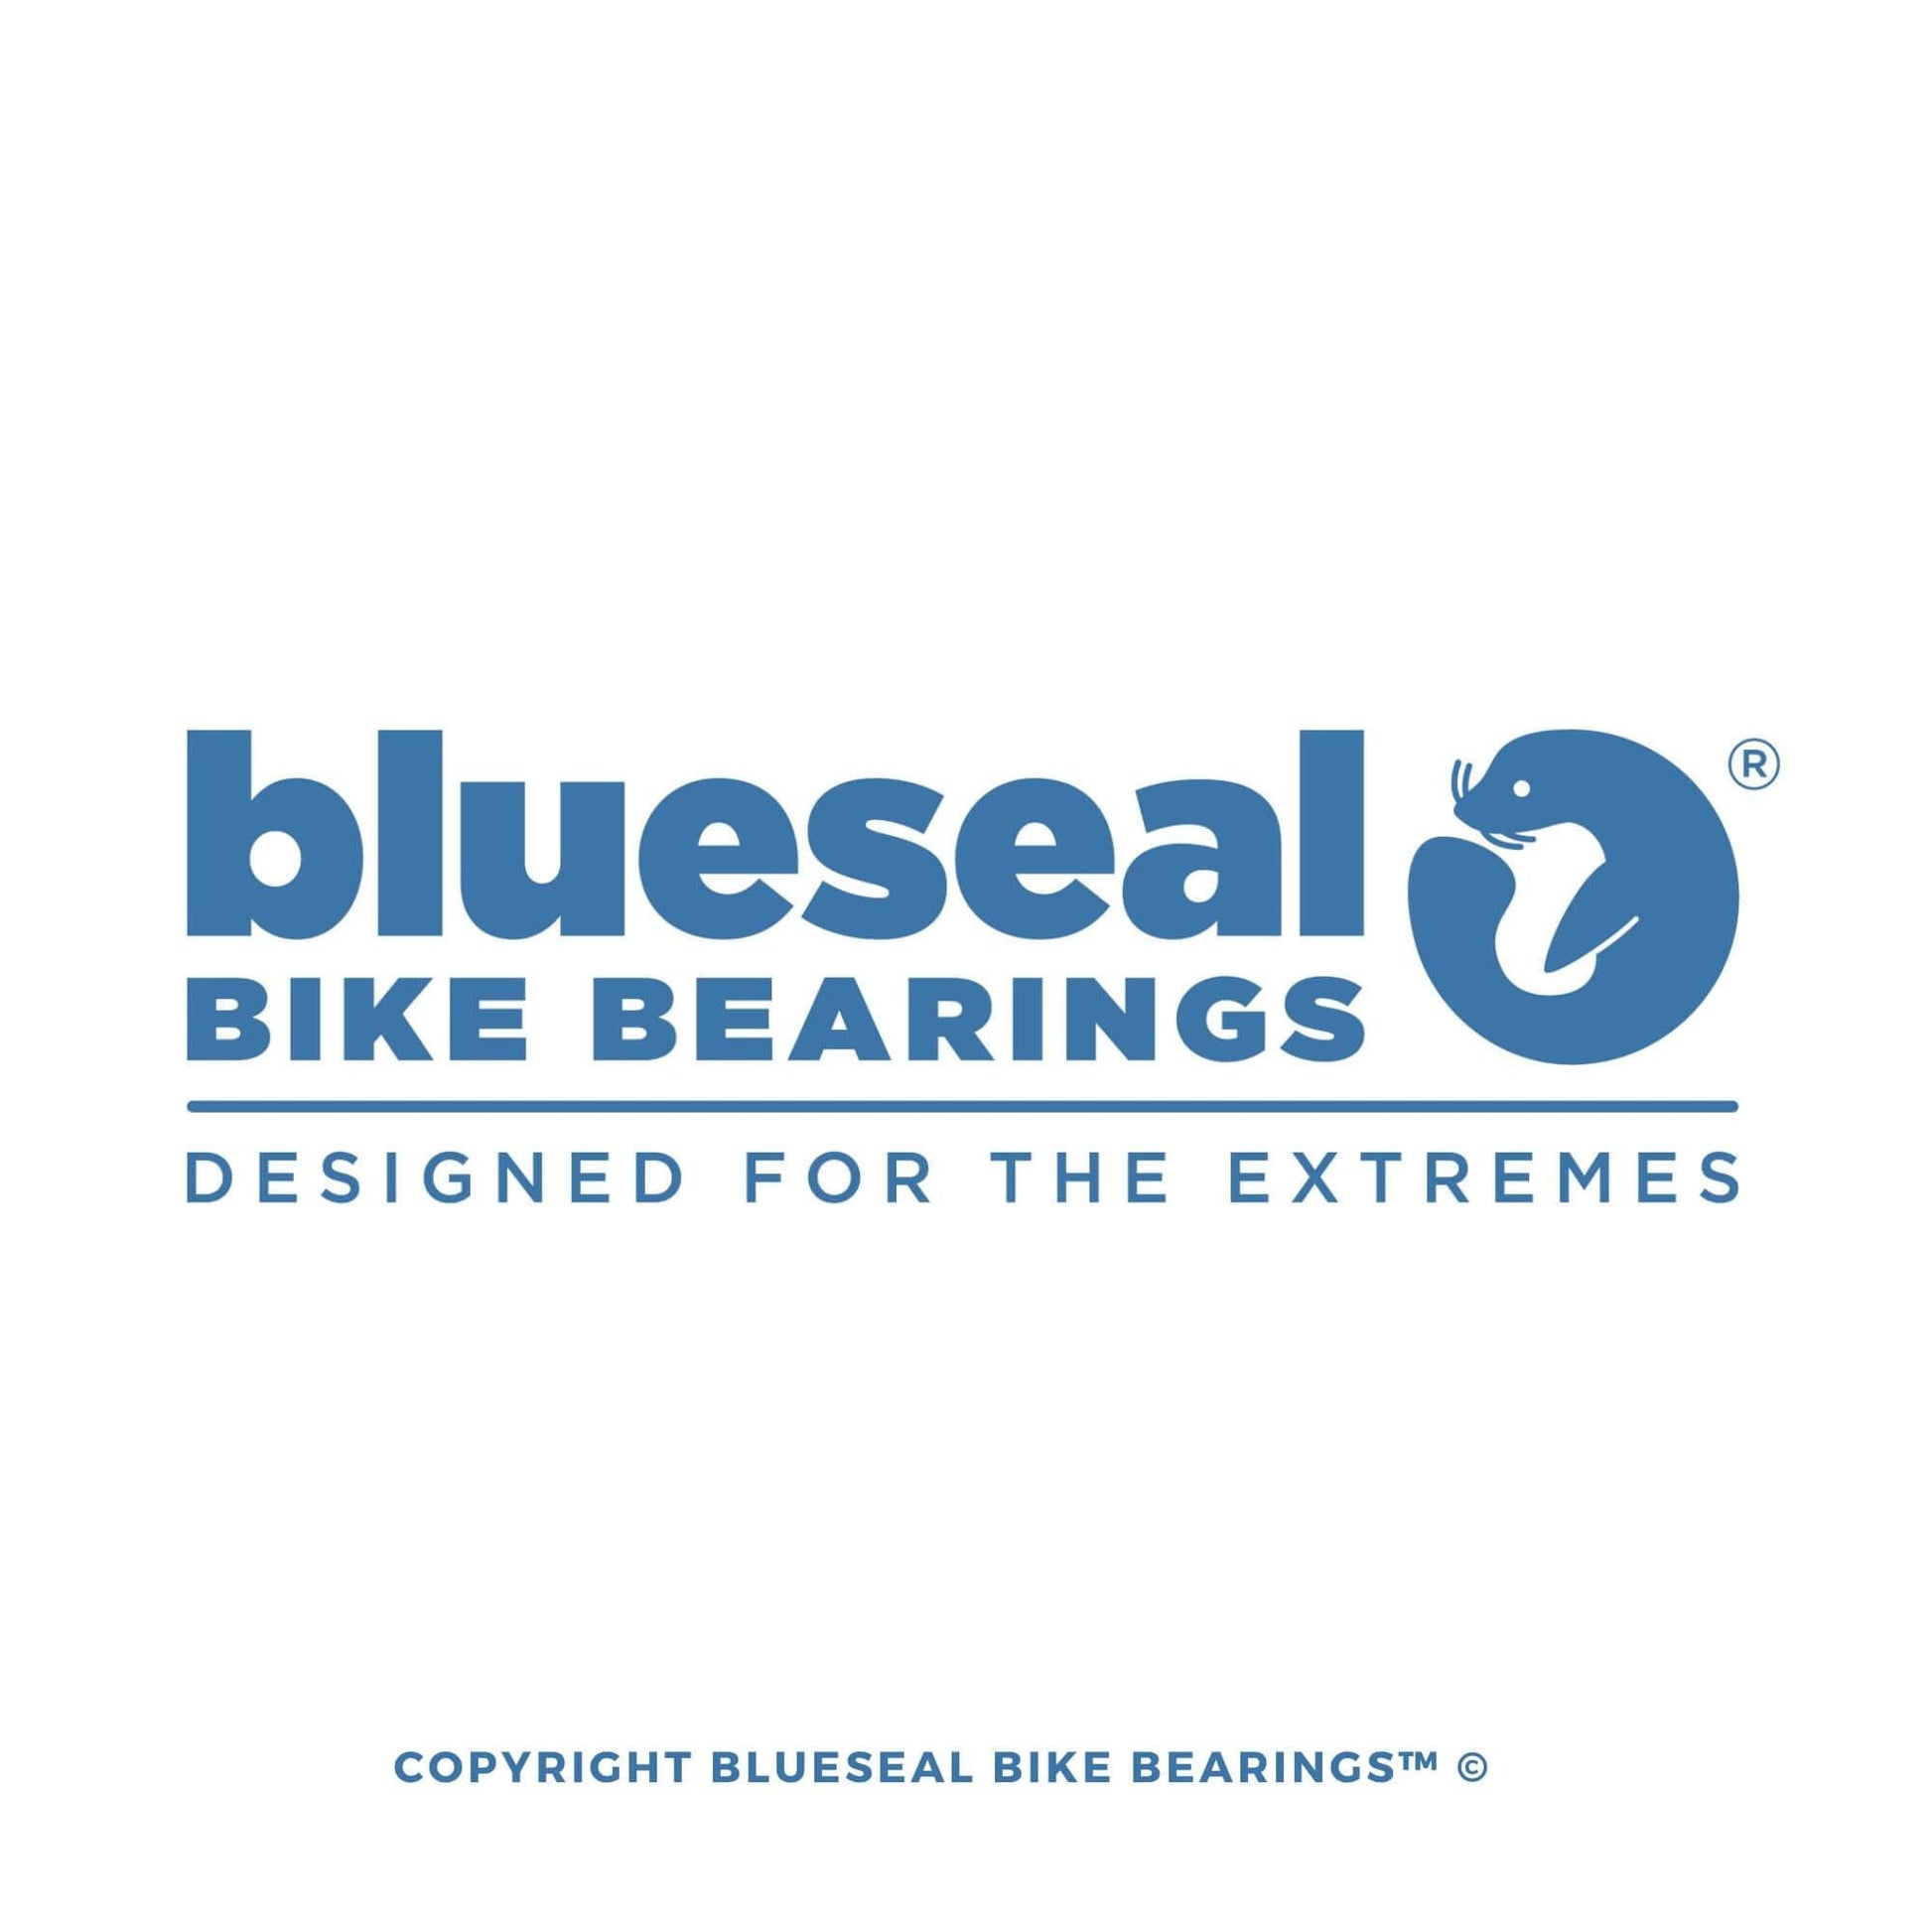 Stumpjumper Pivot Bearing Kit | Blueseal MAX Full Complement - Trailvision - Bicycle Bearing Suppliers